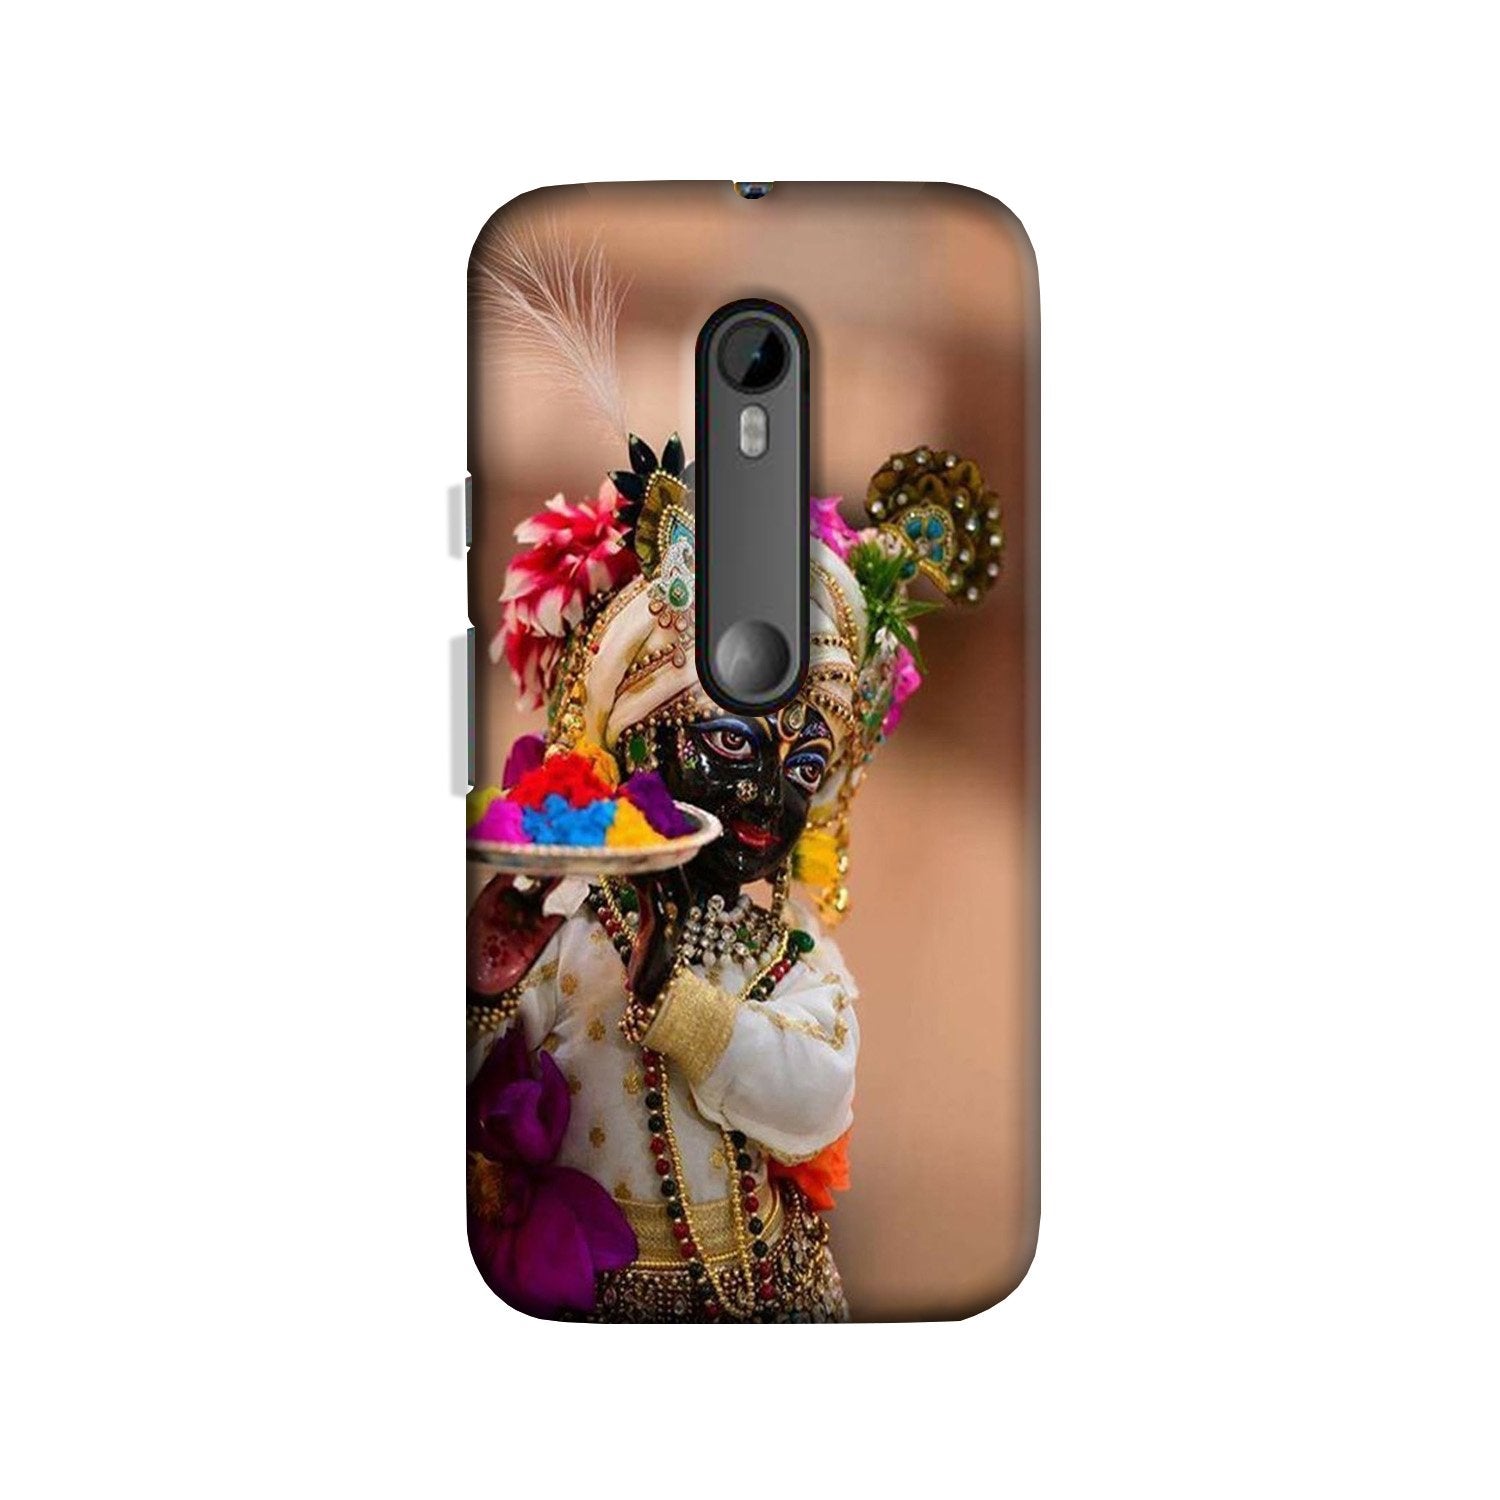 Lord Krishna2 Case for Moto X Play